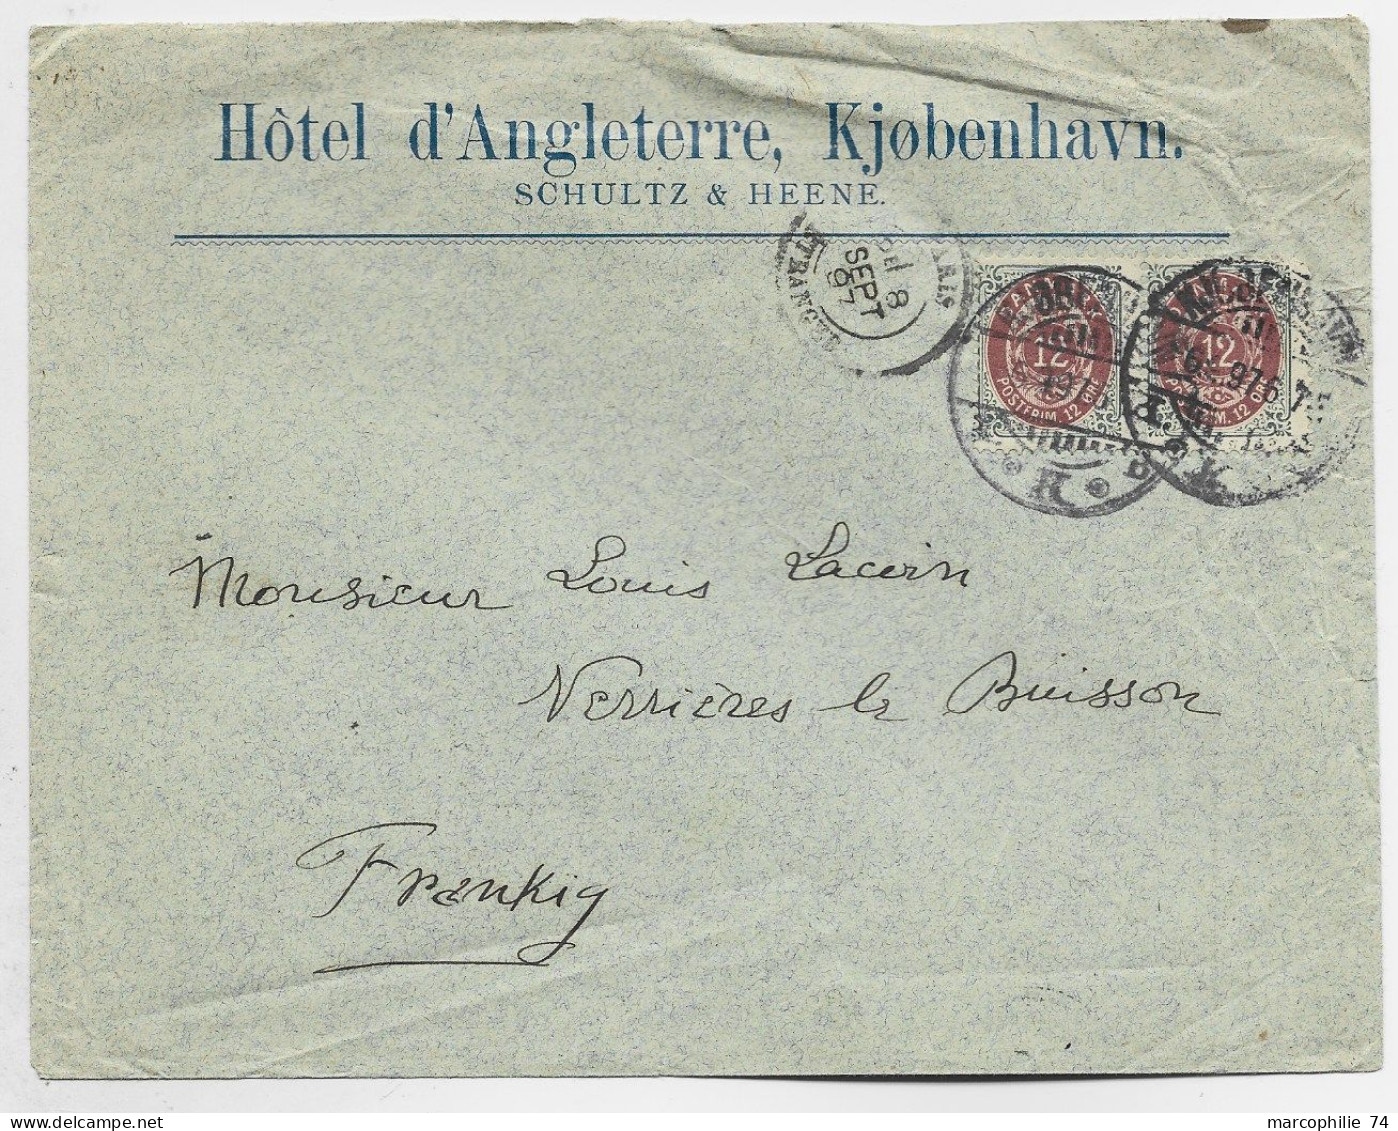 DANMARK 12 ORE PAIRE LETTRE COVER ENTETE HOTEL D'ANGLETERRE 1897  TO FRANCE - Lettres & Documents